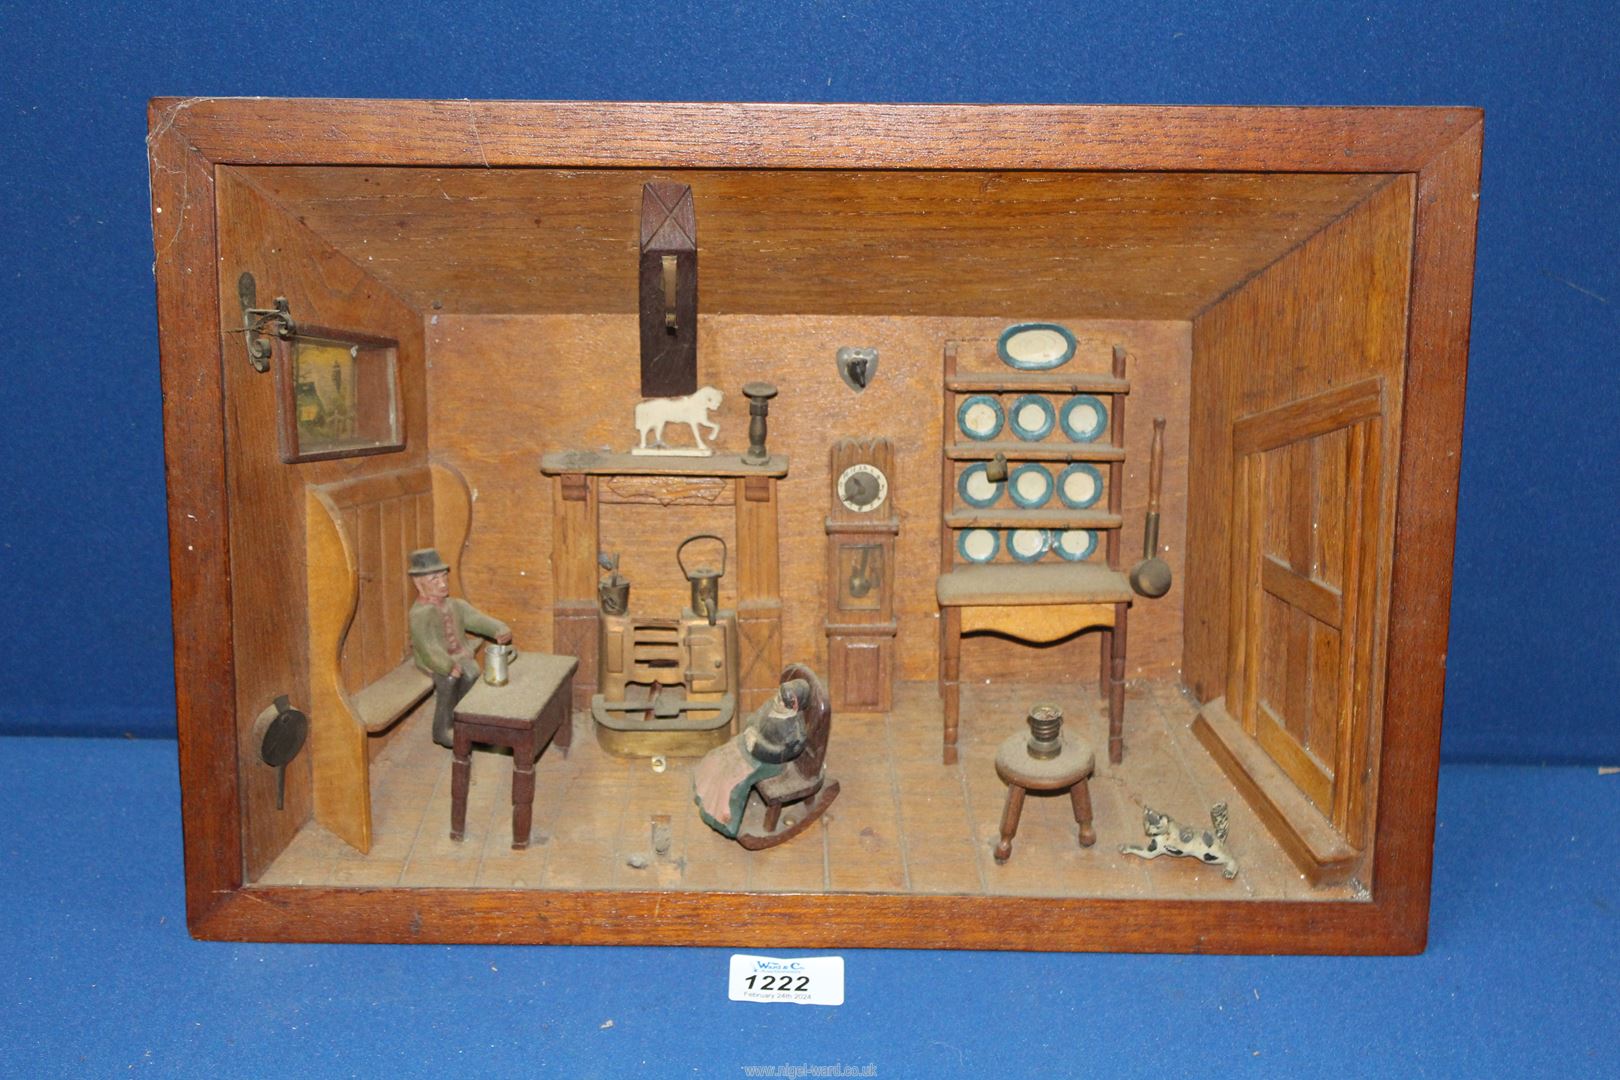 A Black Forest carved Diorama of a room interior with a Grandfather clock, dresser and two figures,